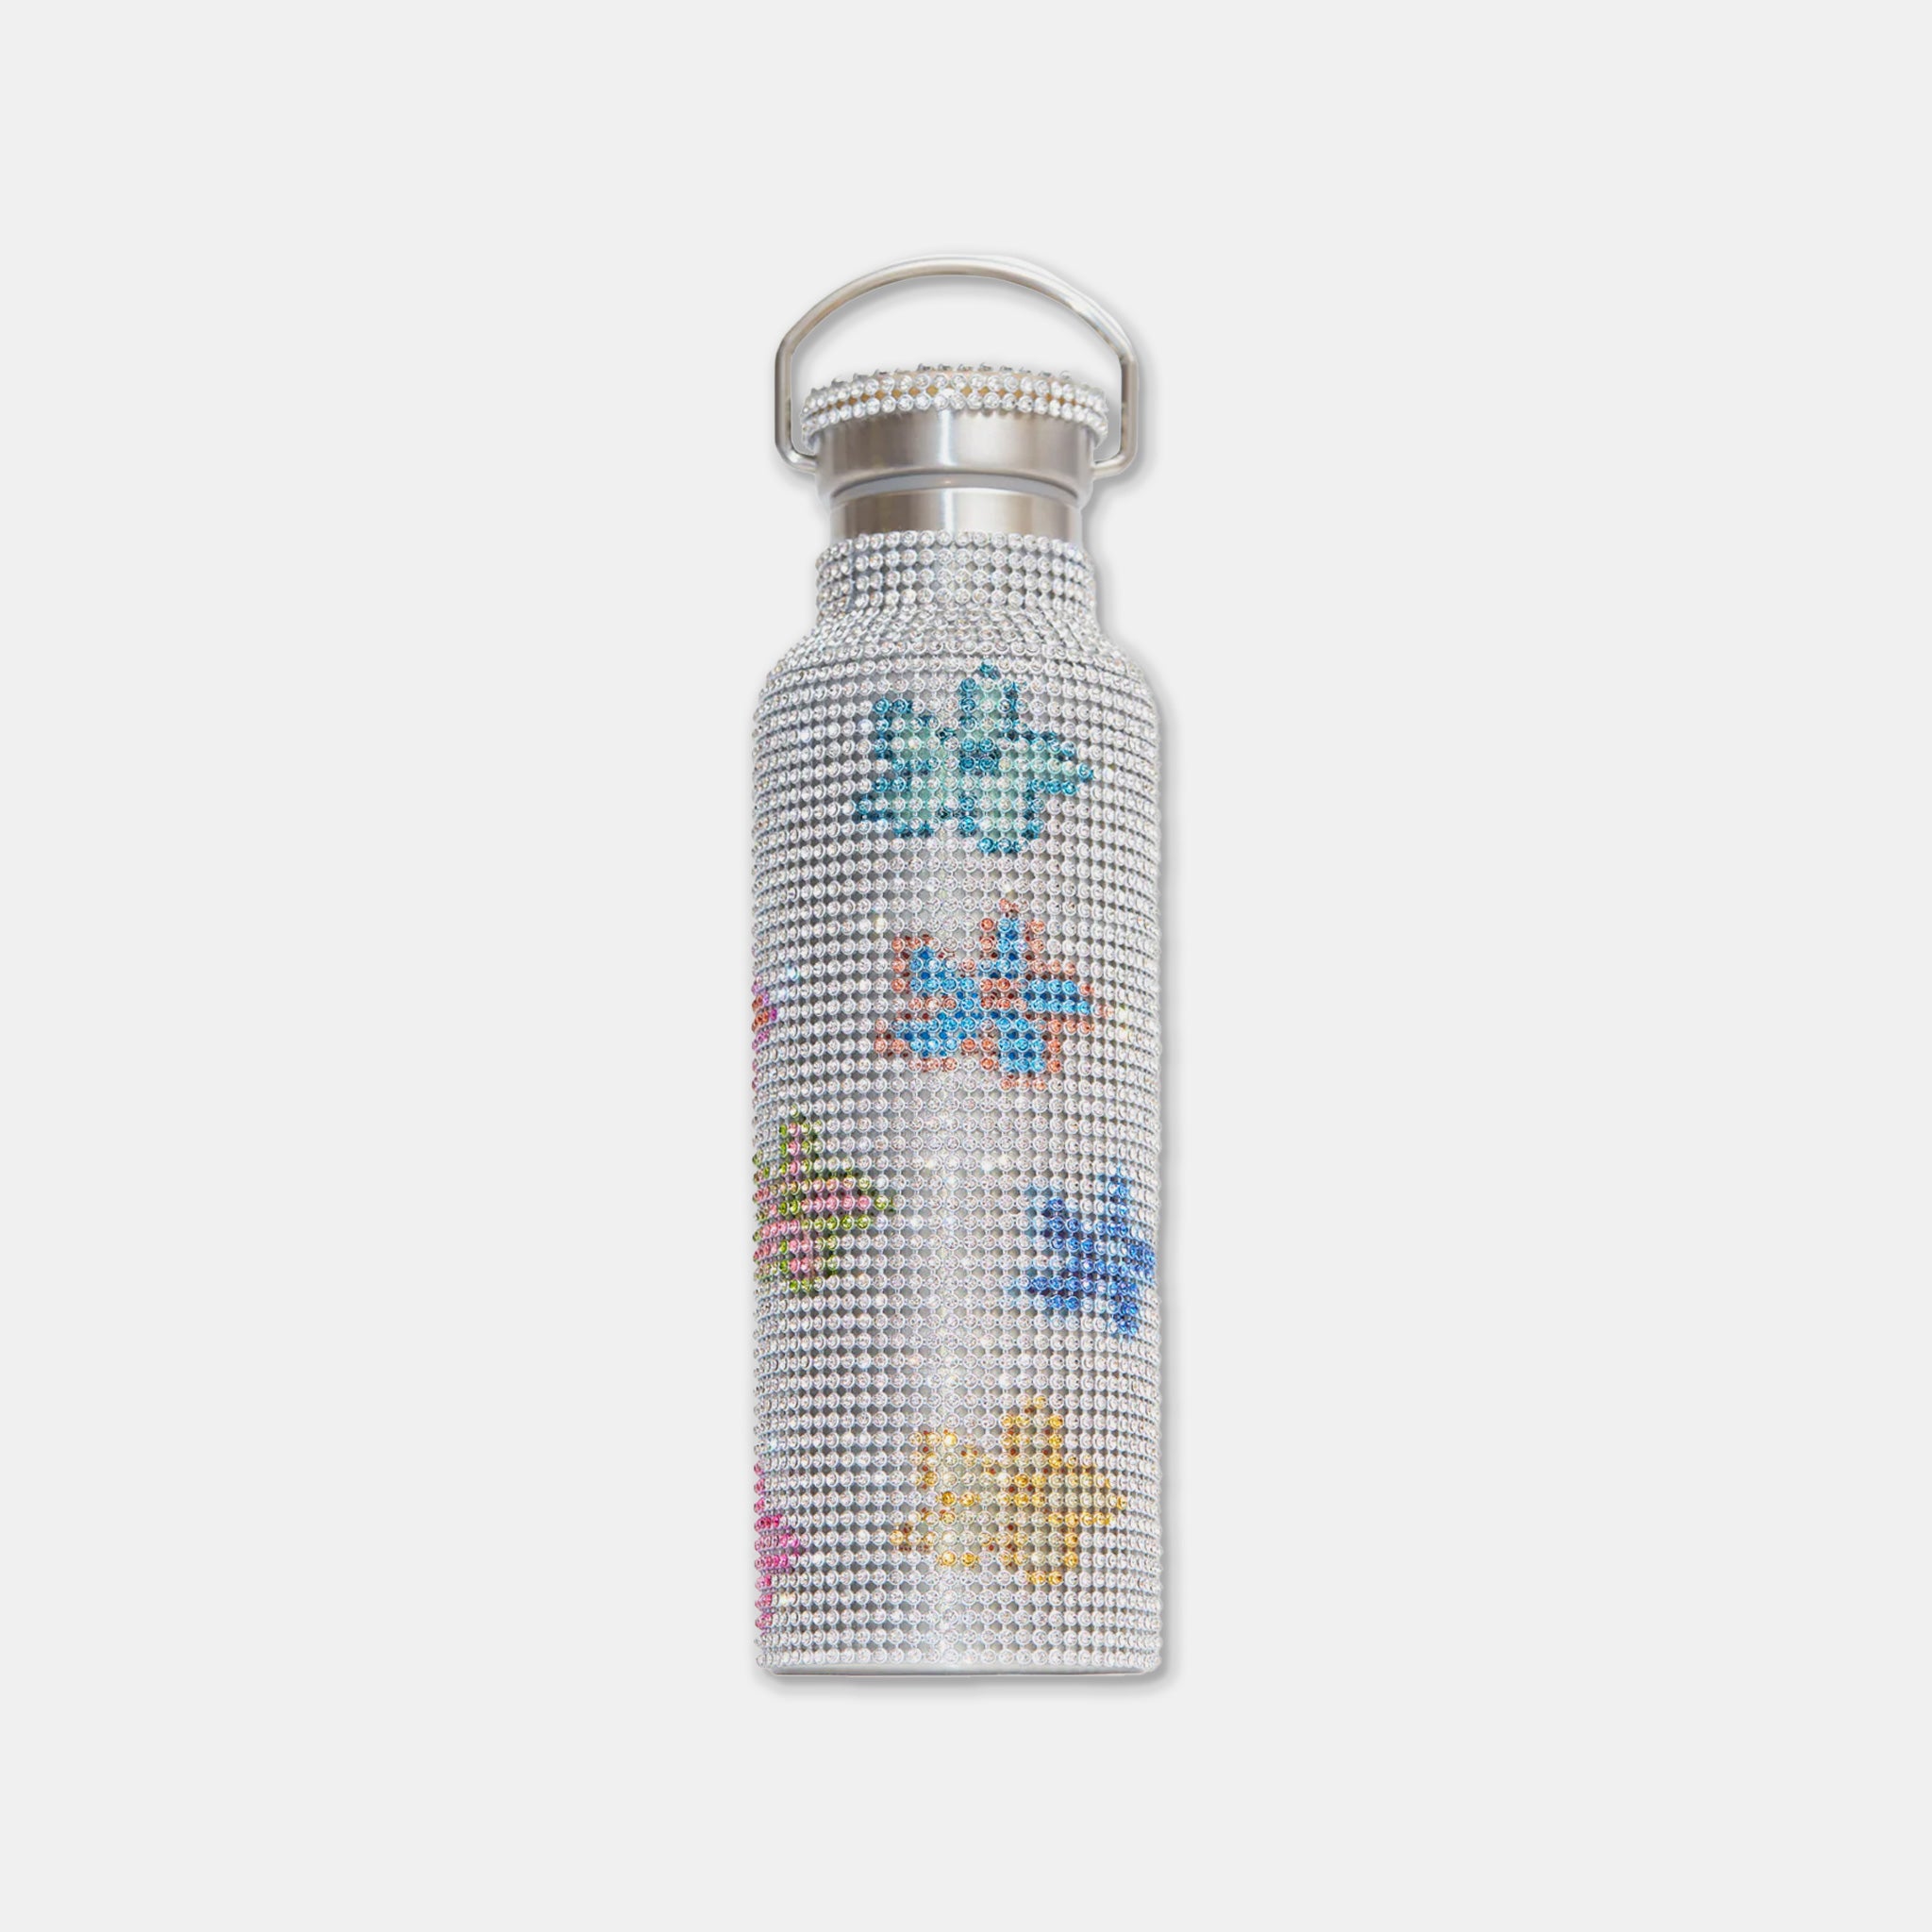 Stainless steel water bottle encrusted with white rhinestones and a multi-colored floral pattern.